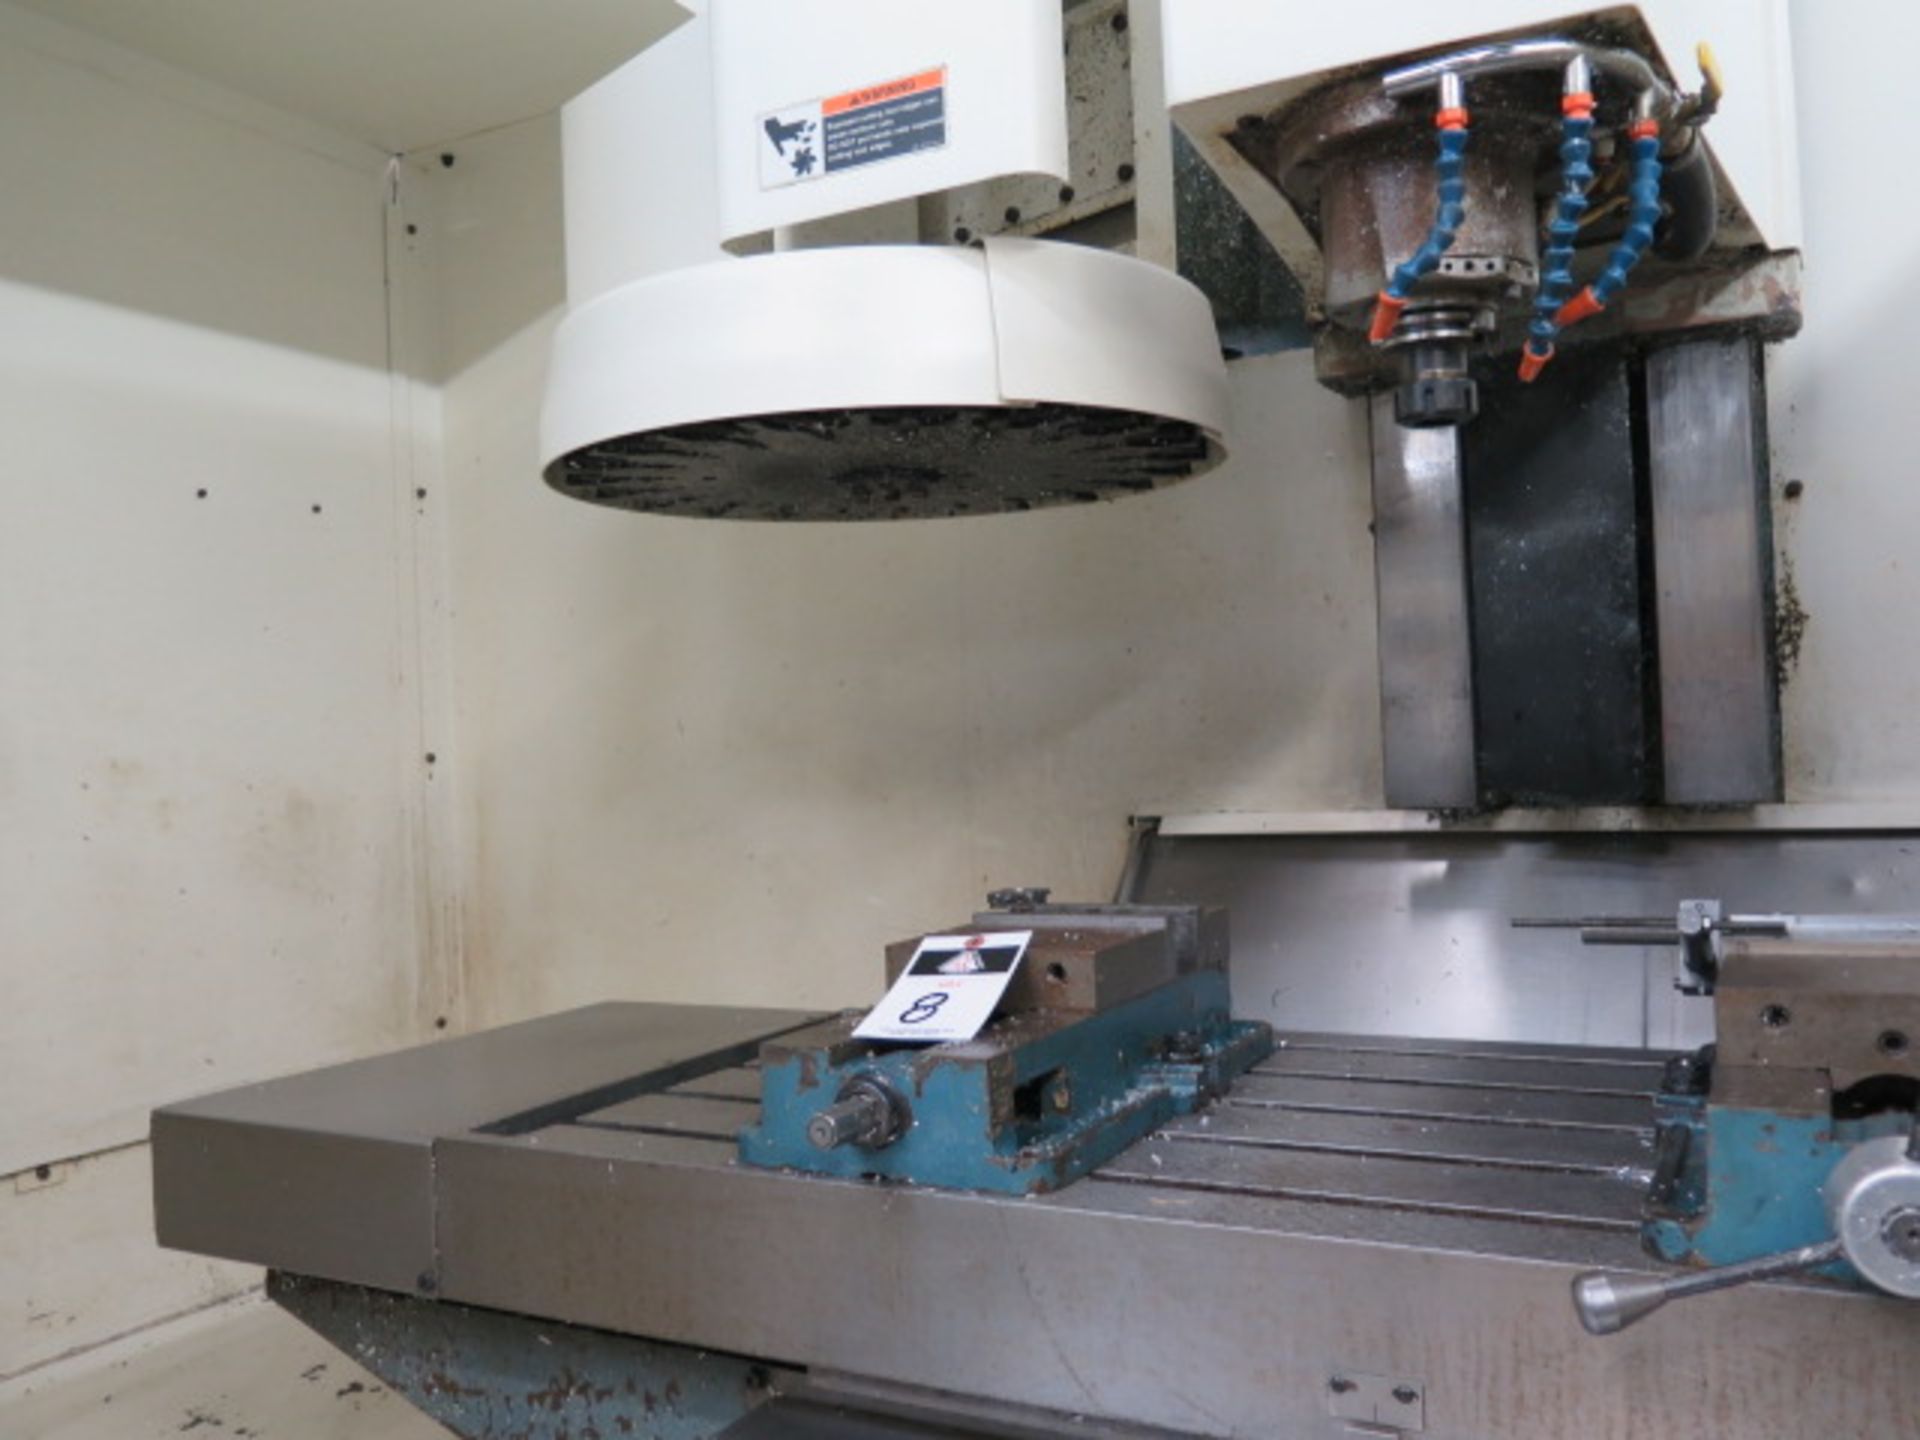 2013 Fadal VMC4020 CNC Vertical Machining Center s/n 1303070690 ( Wesco Factory Rebuilt in 2013 ) w/ - Image 7 of 12